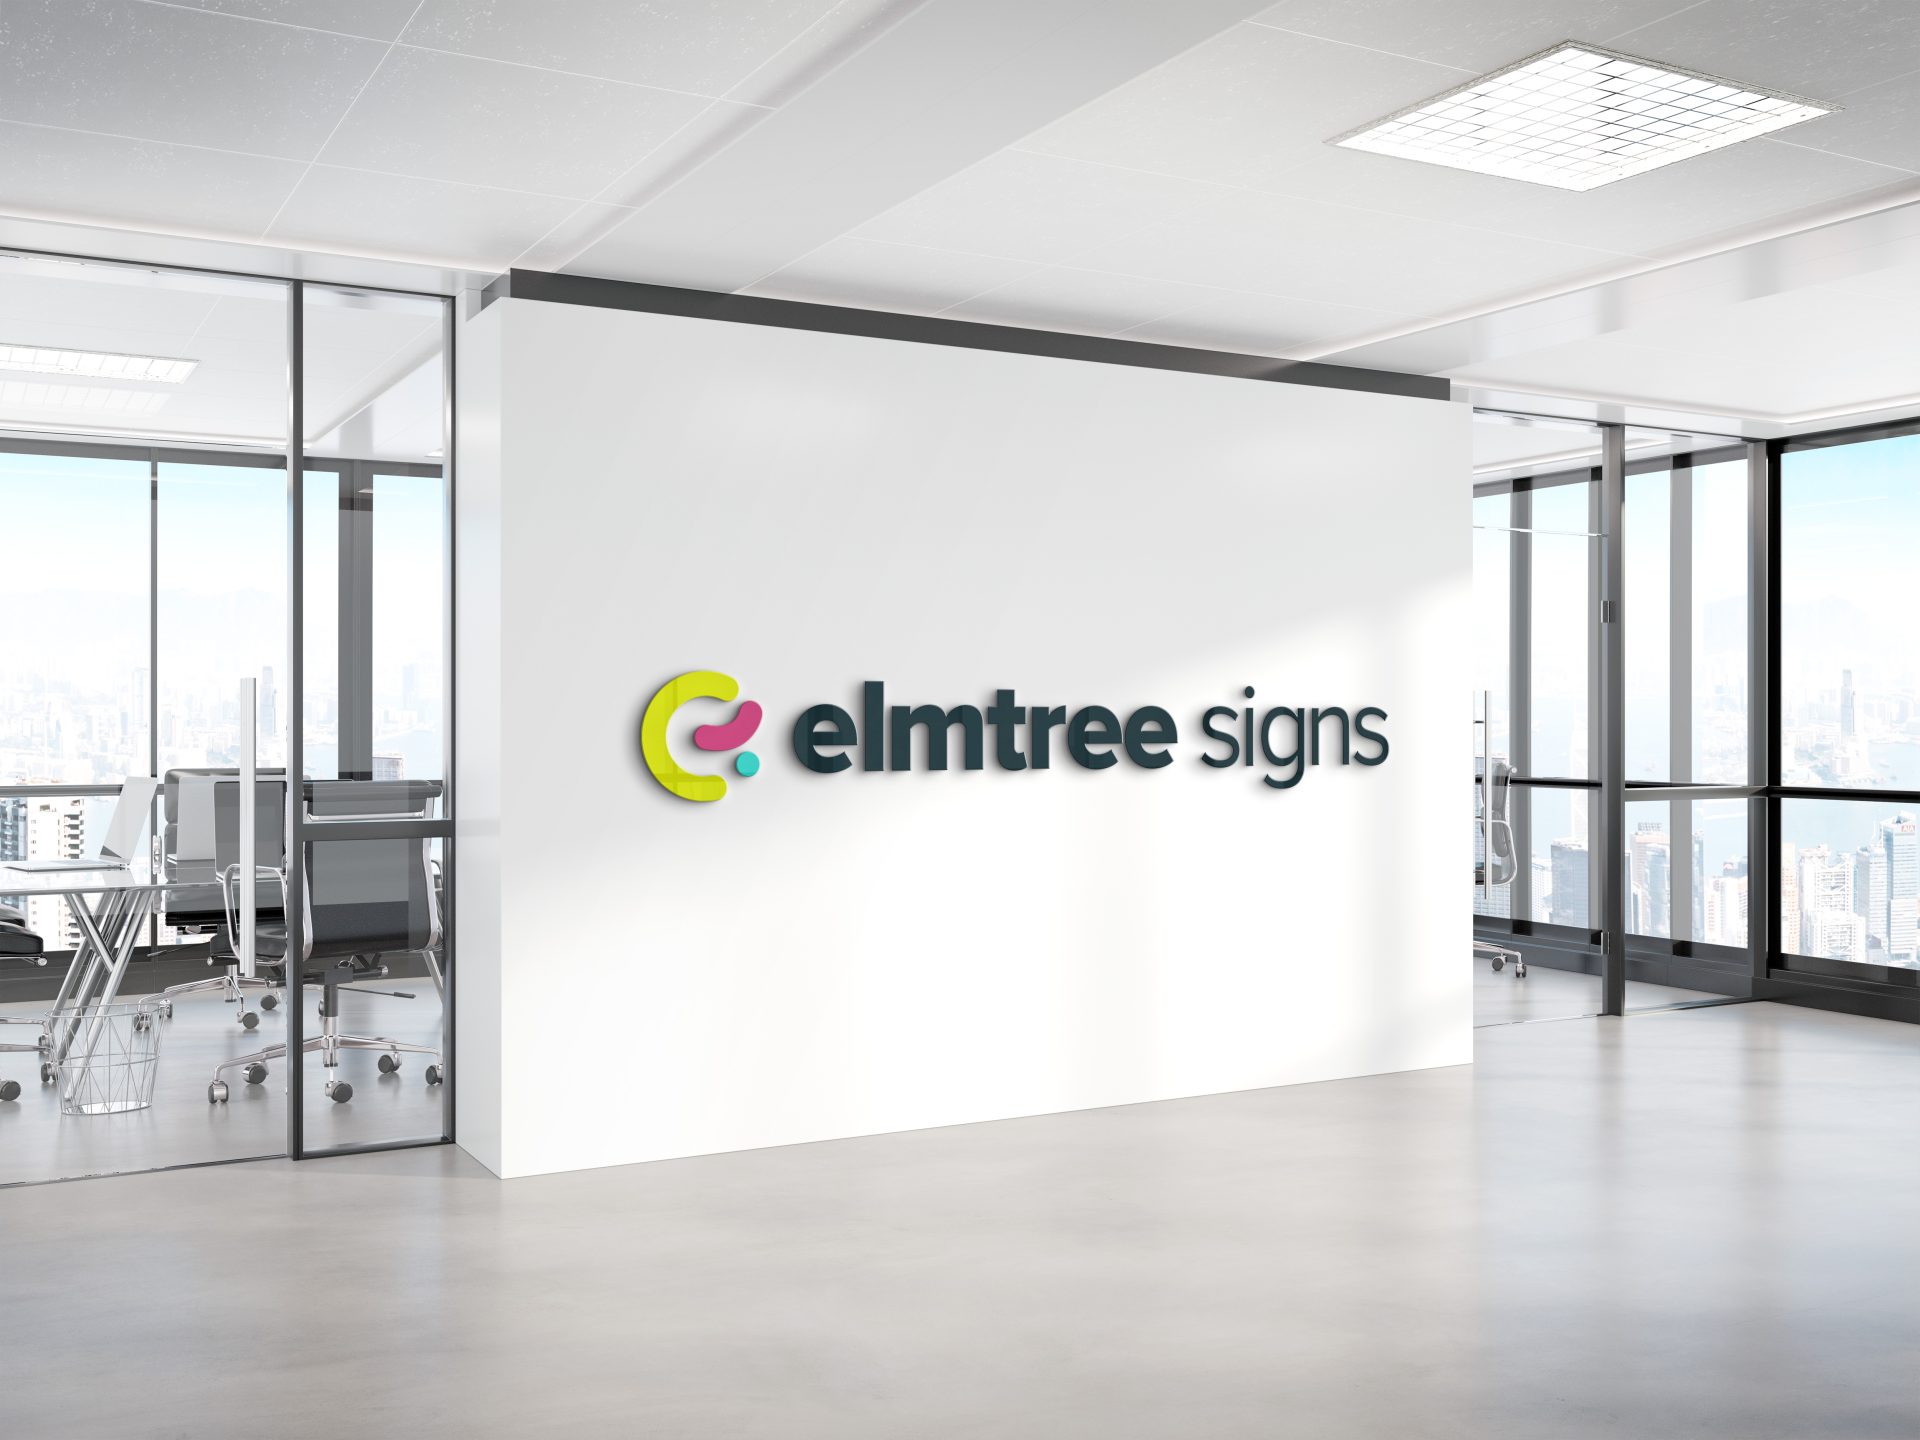 elmtree signs logo featuring on an office wall mockup